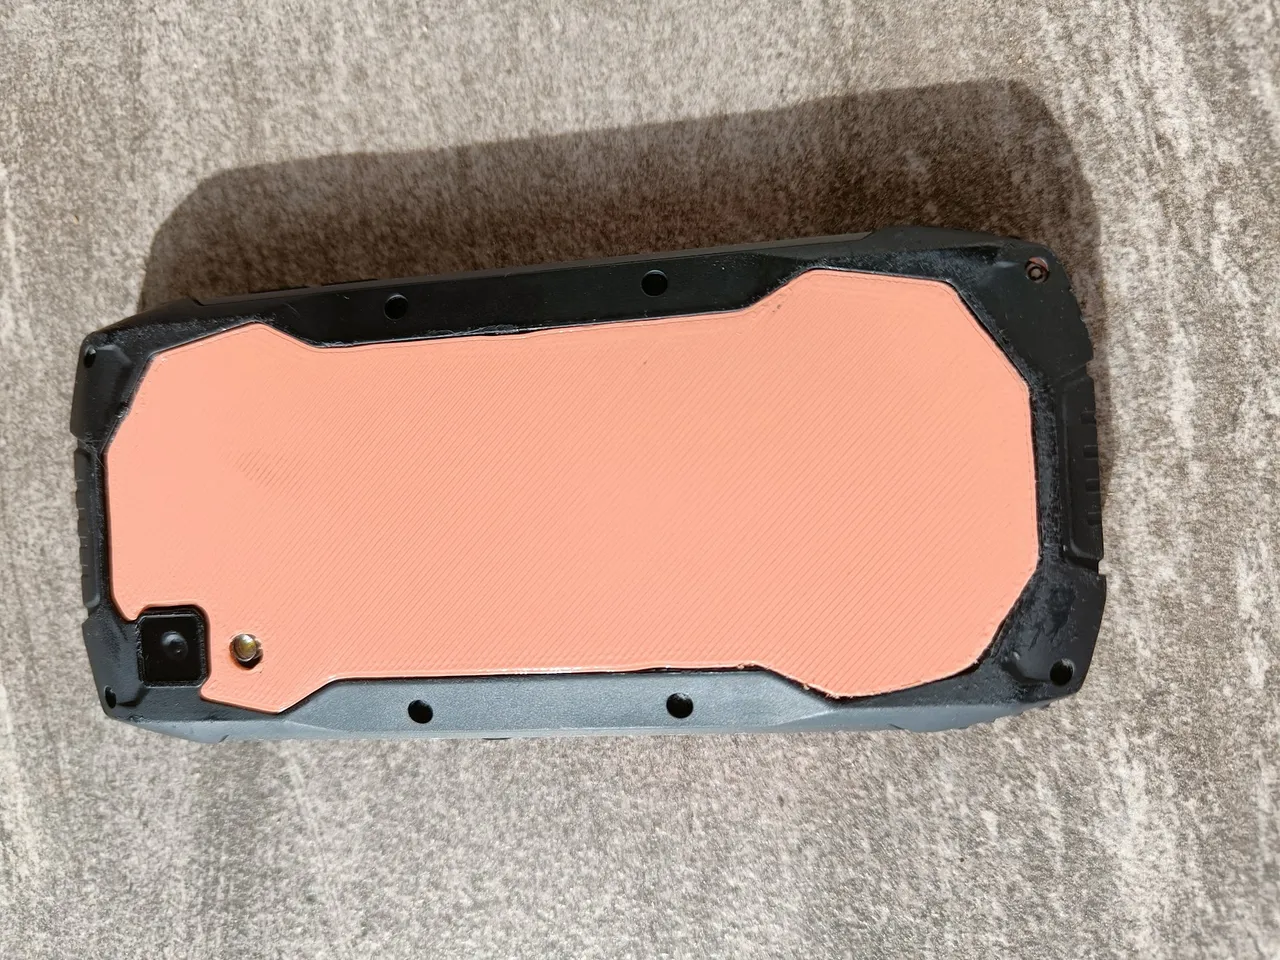 Cubot king kong mini 3 backplate replacement by jamesgt